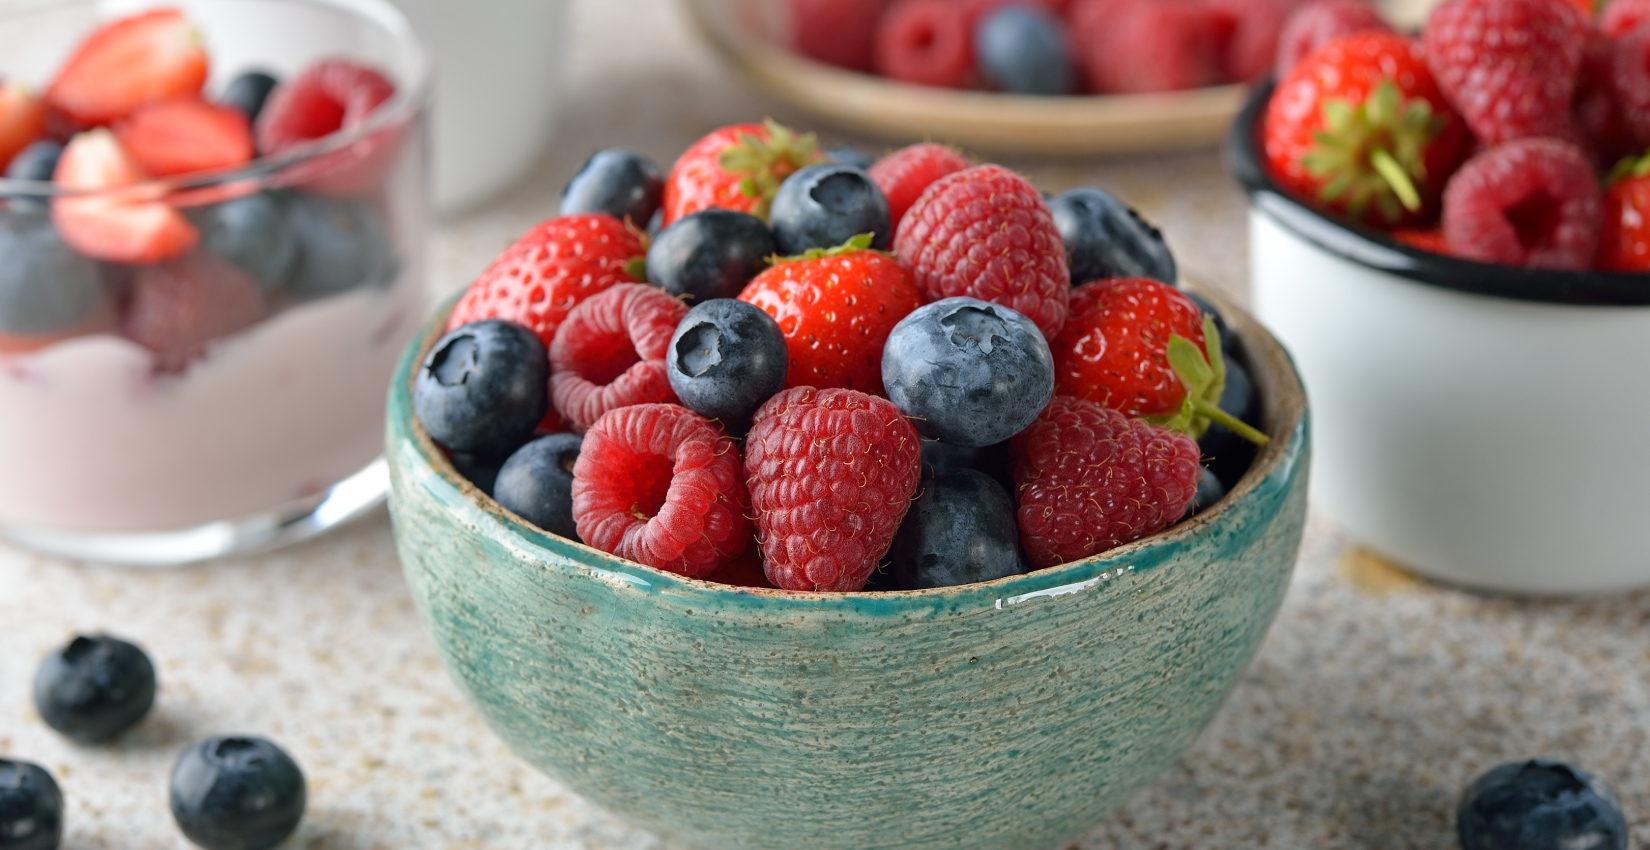 image of strawberry, blackberries, raspberries, and blueberries in a teal ceramic bowl with more in the background